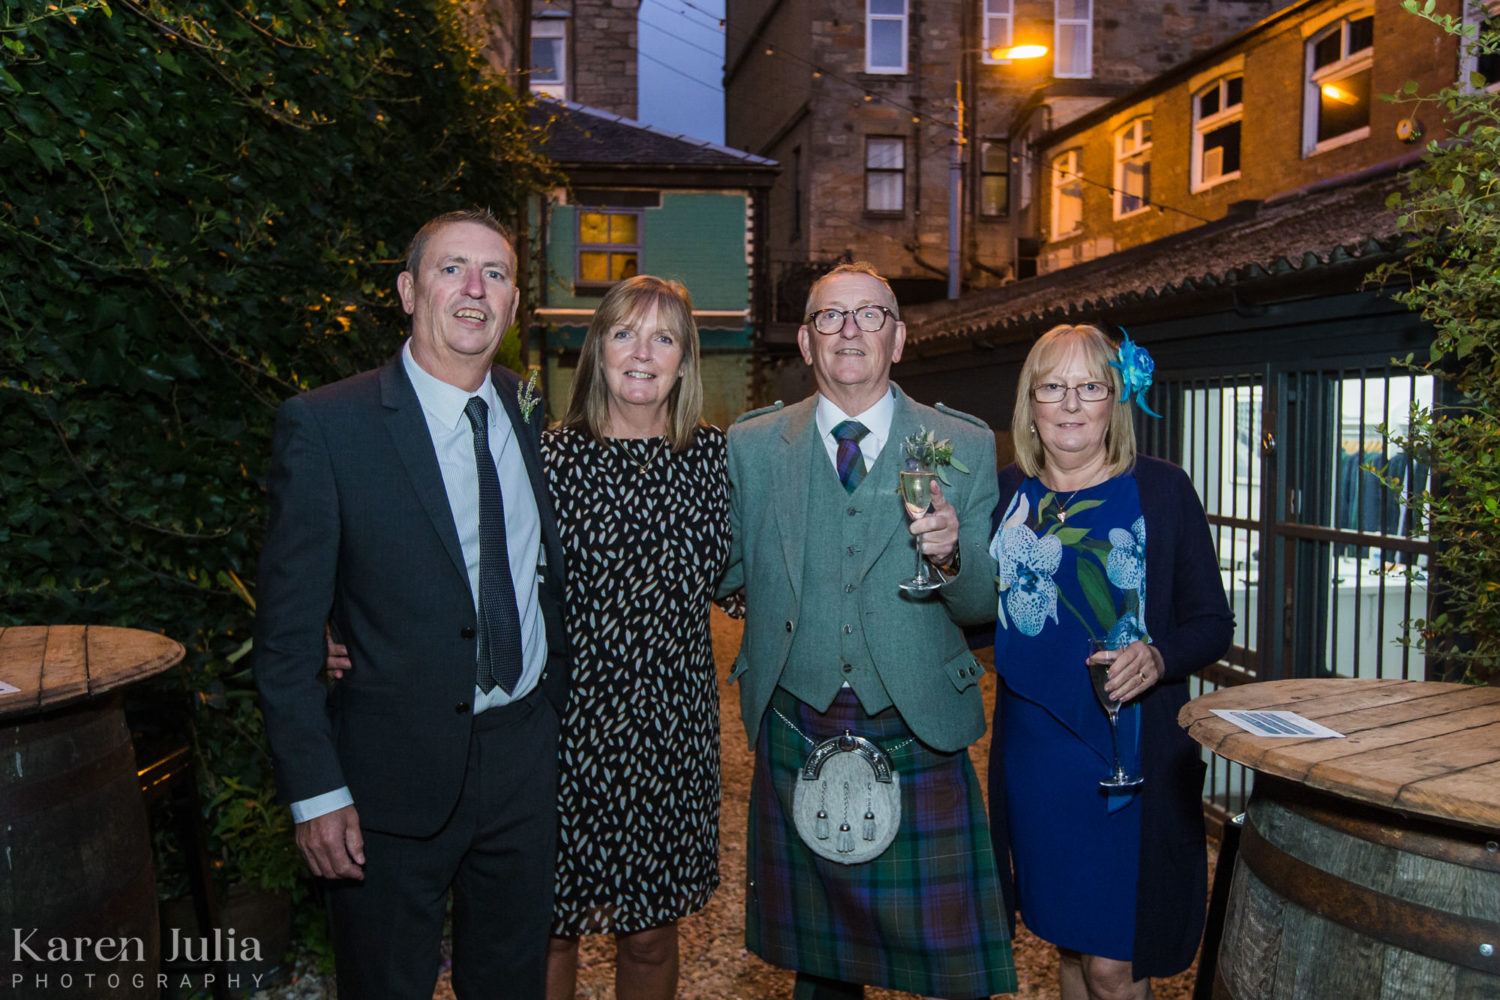 wedding guest group photo in the Bothy garden at night